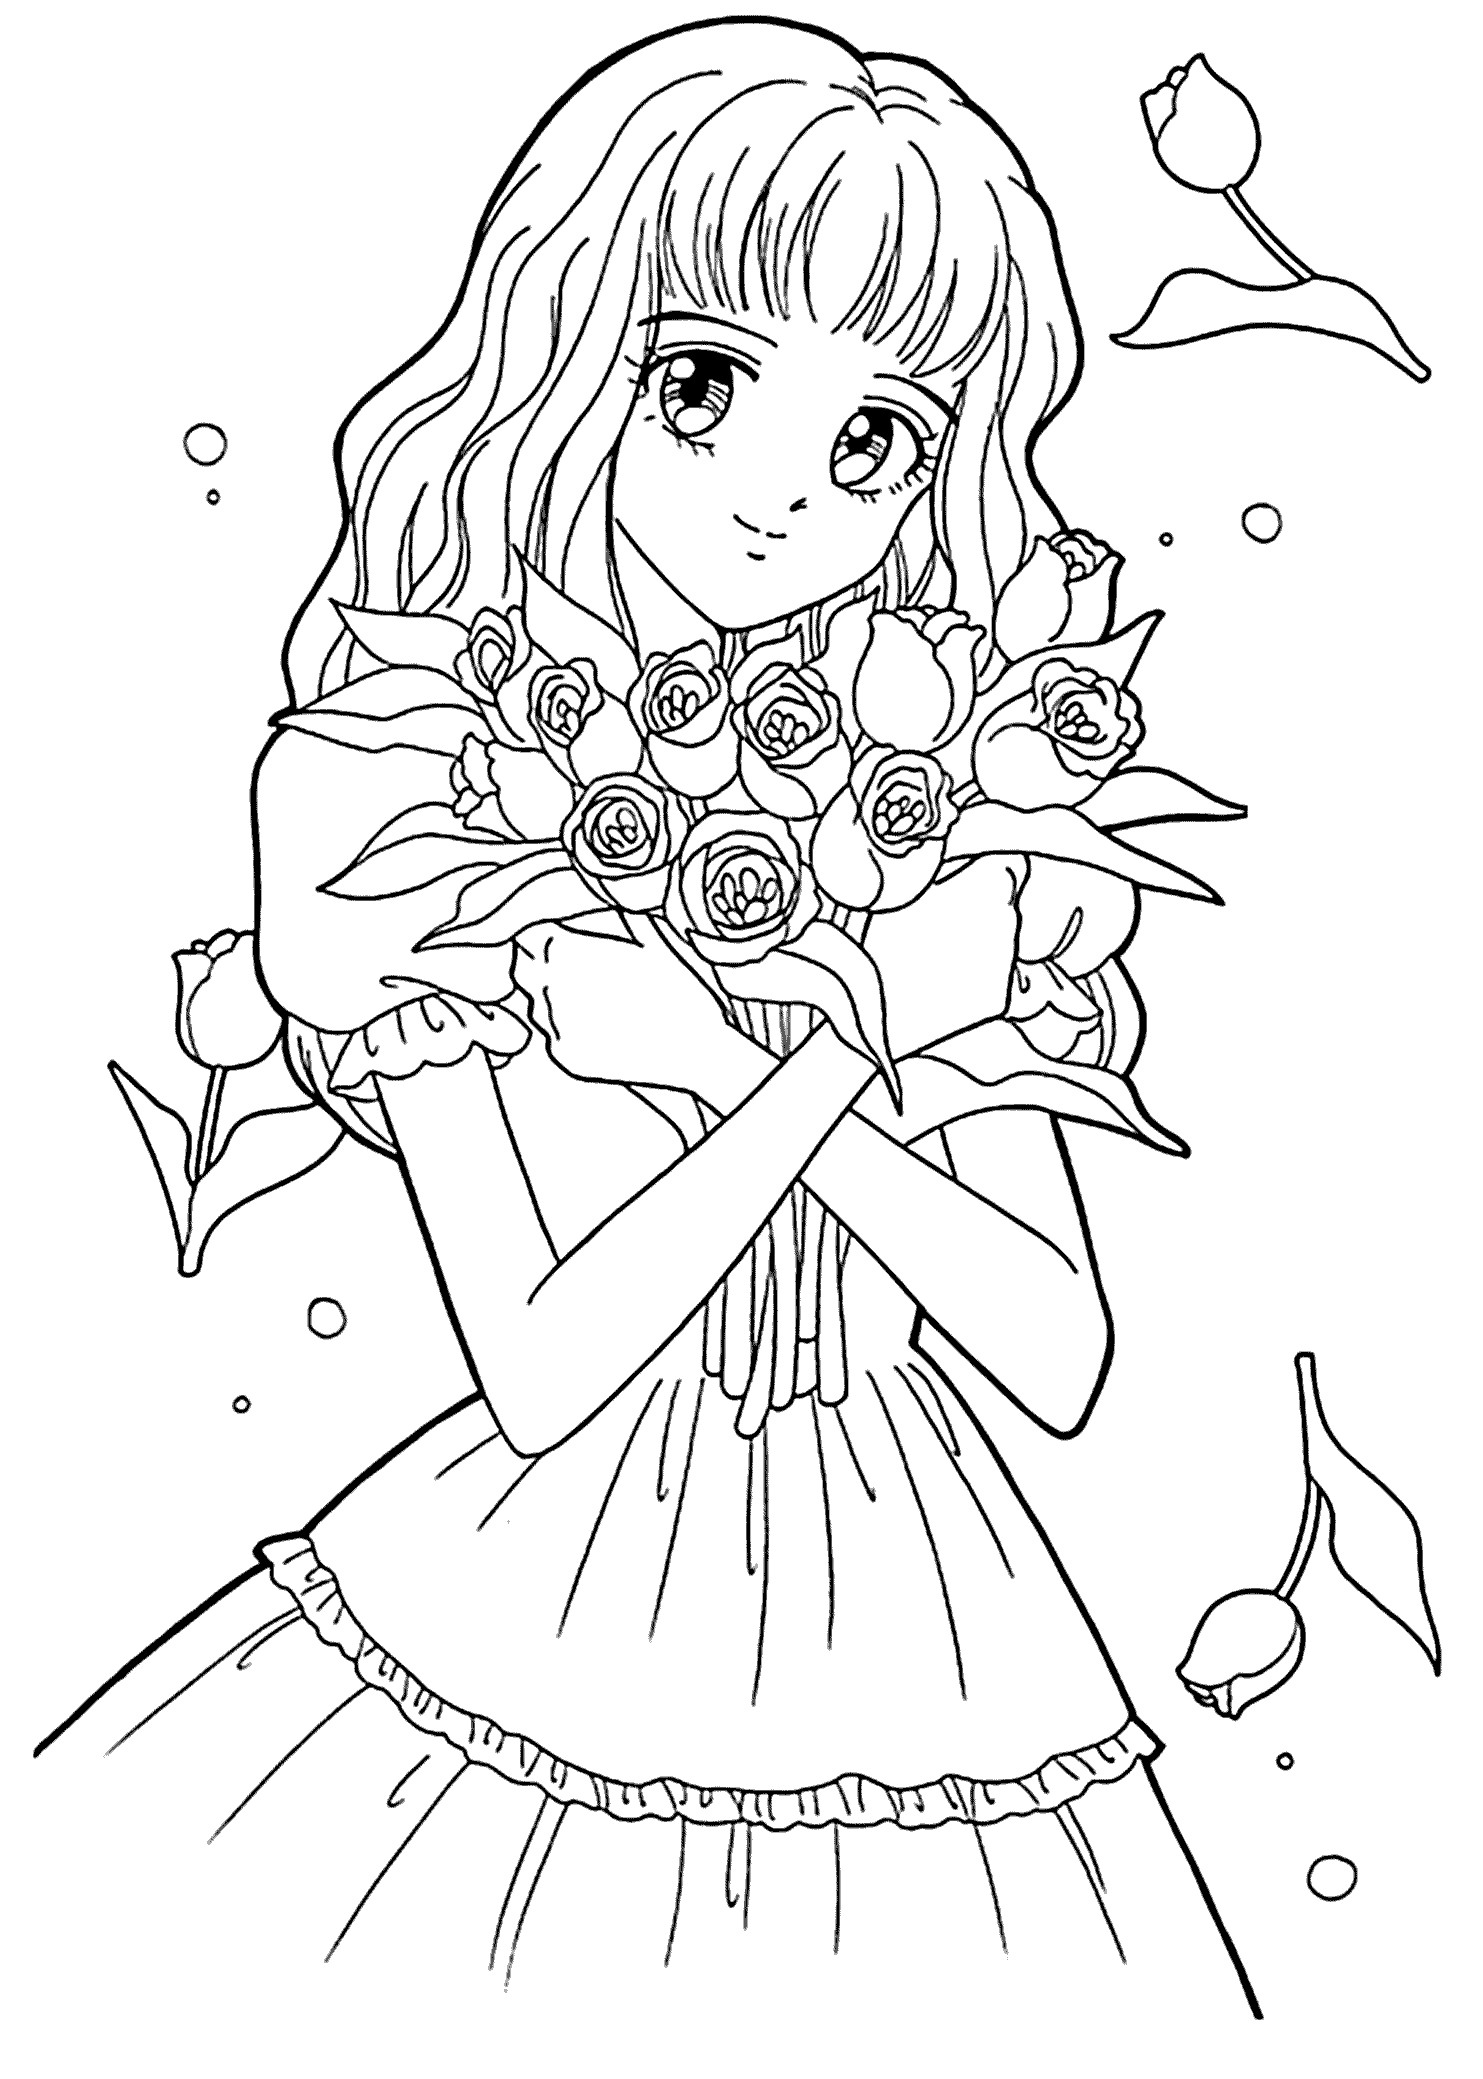 Anime Girl And Boy Coloring Pages
 Meiko from Marmalade boy coloring pages for kids